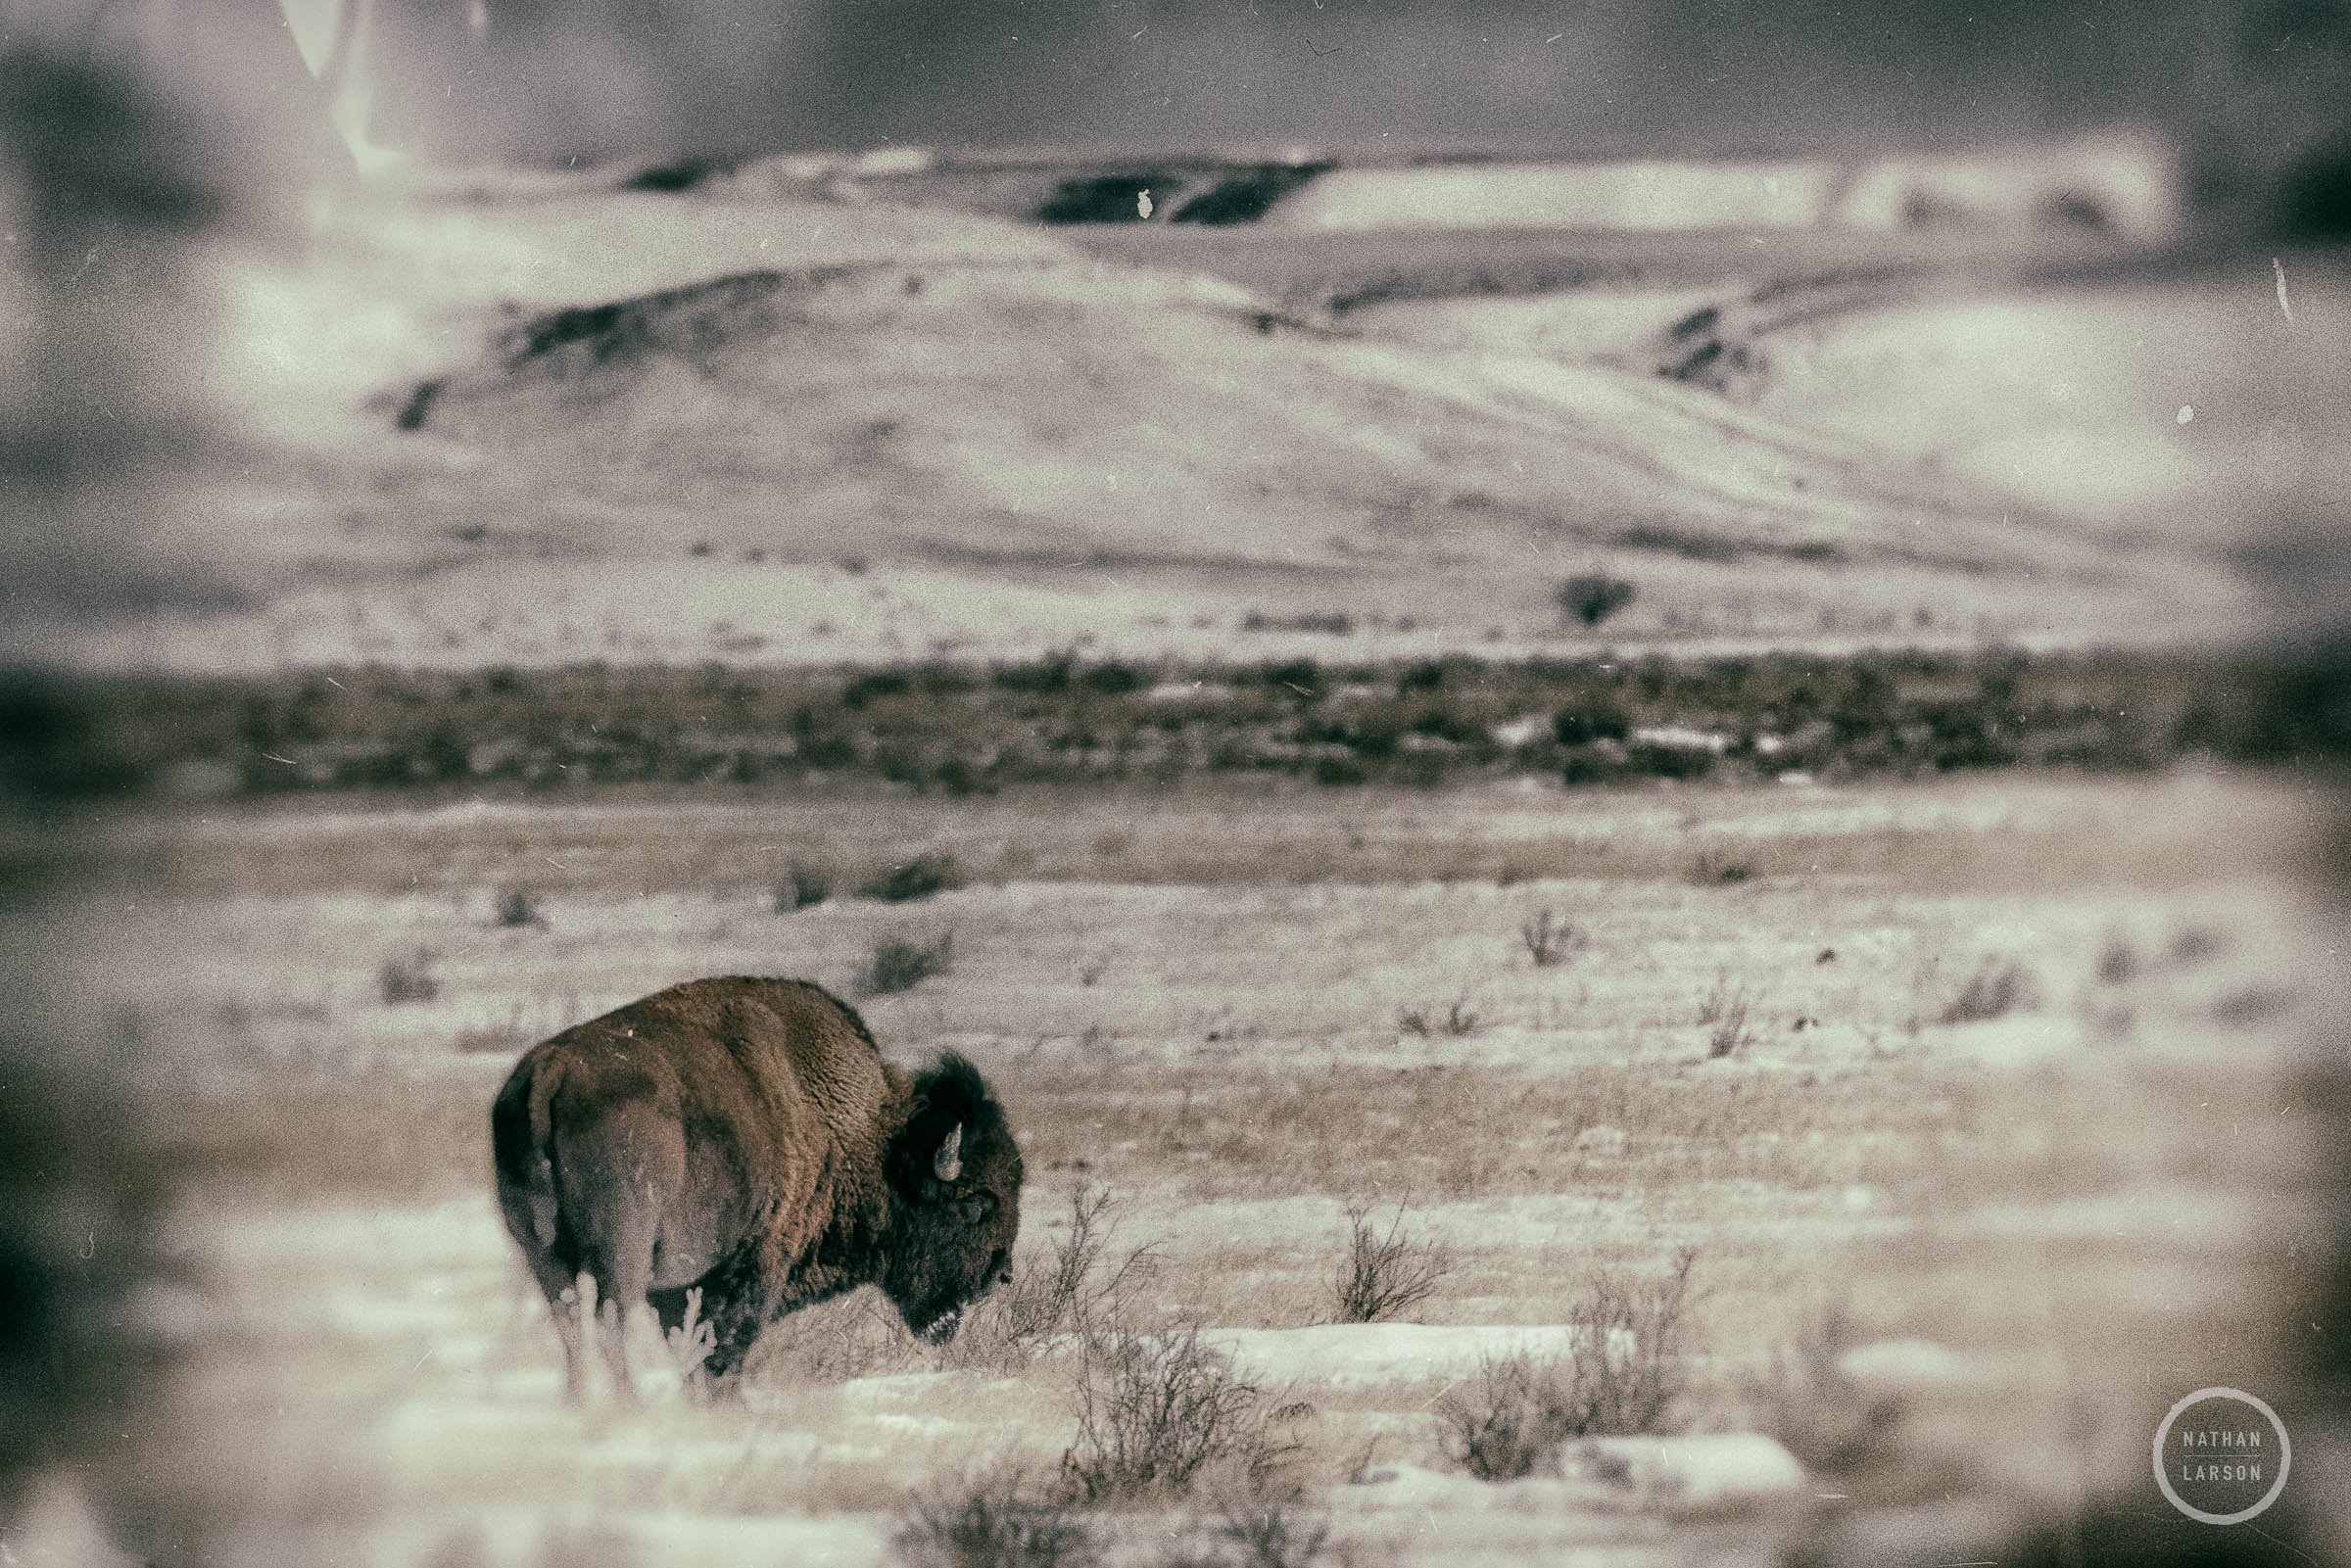 American Bison facing the wind as it grazes in the open praire.